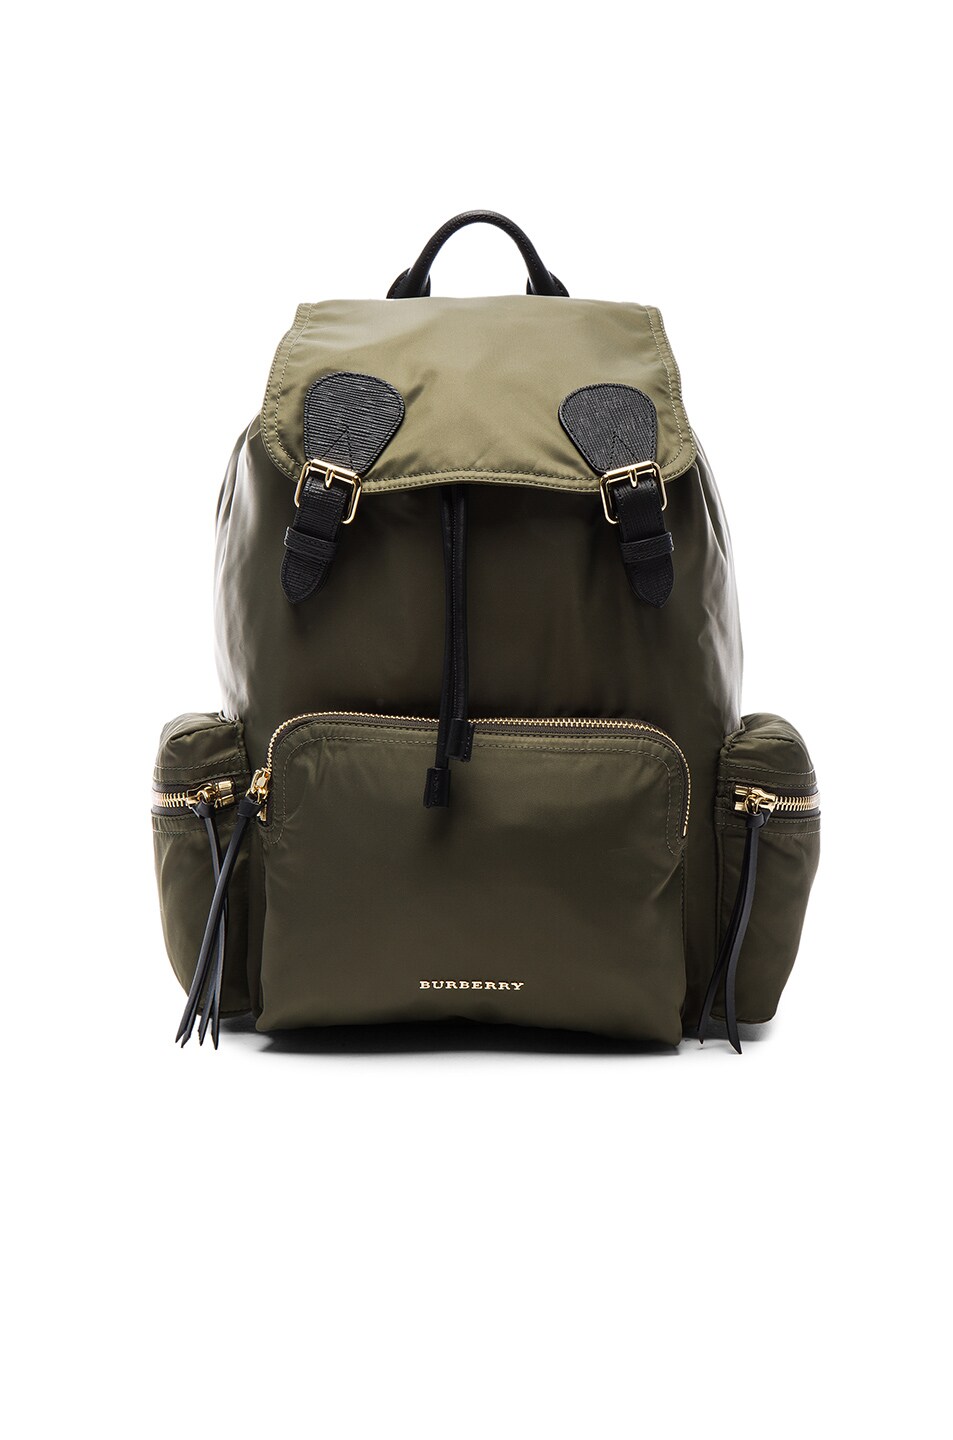 Image 1 of Burberry Prorsum Large Nylon Rucksack in Canvas Green